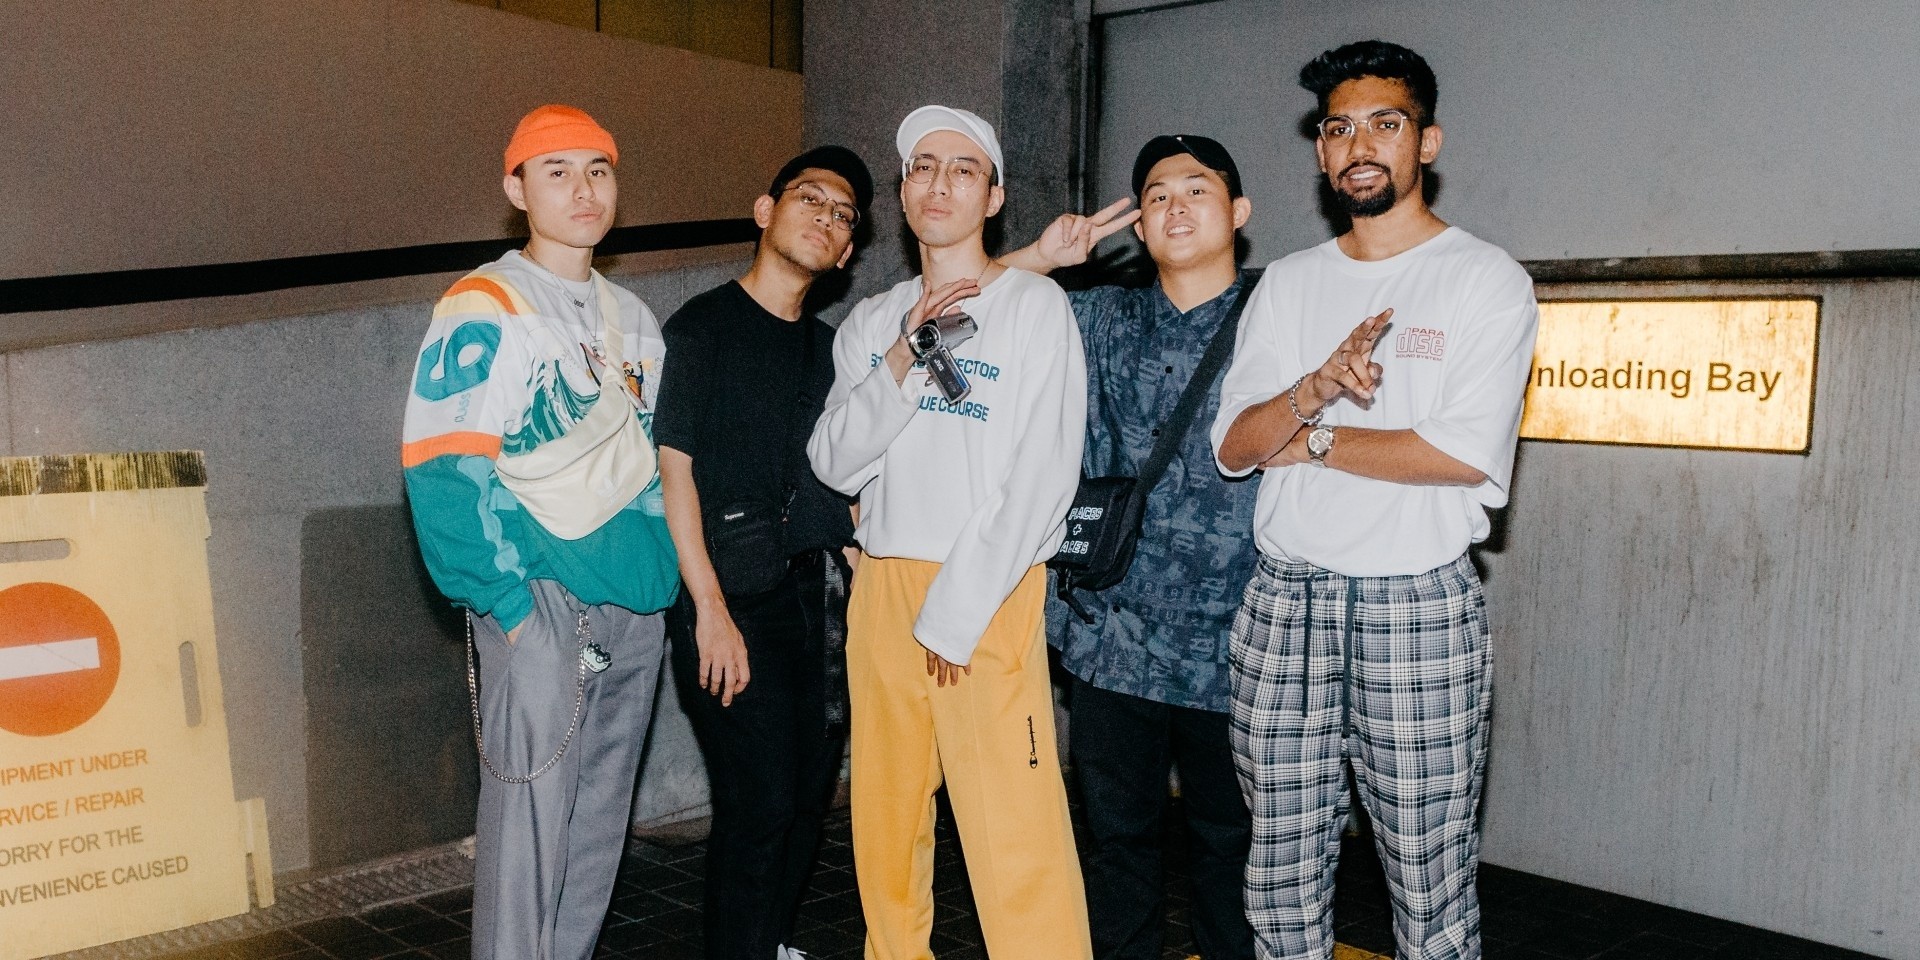 "We’ll make it happen, no matter what": Meet the Island Boys Collective